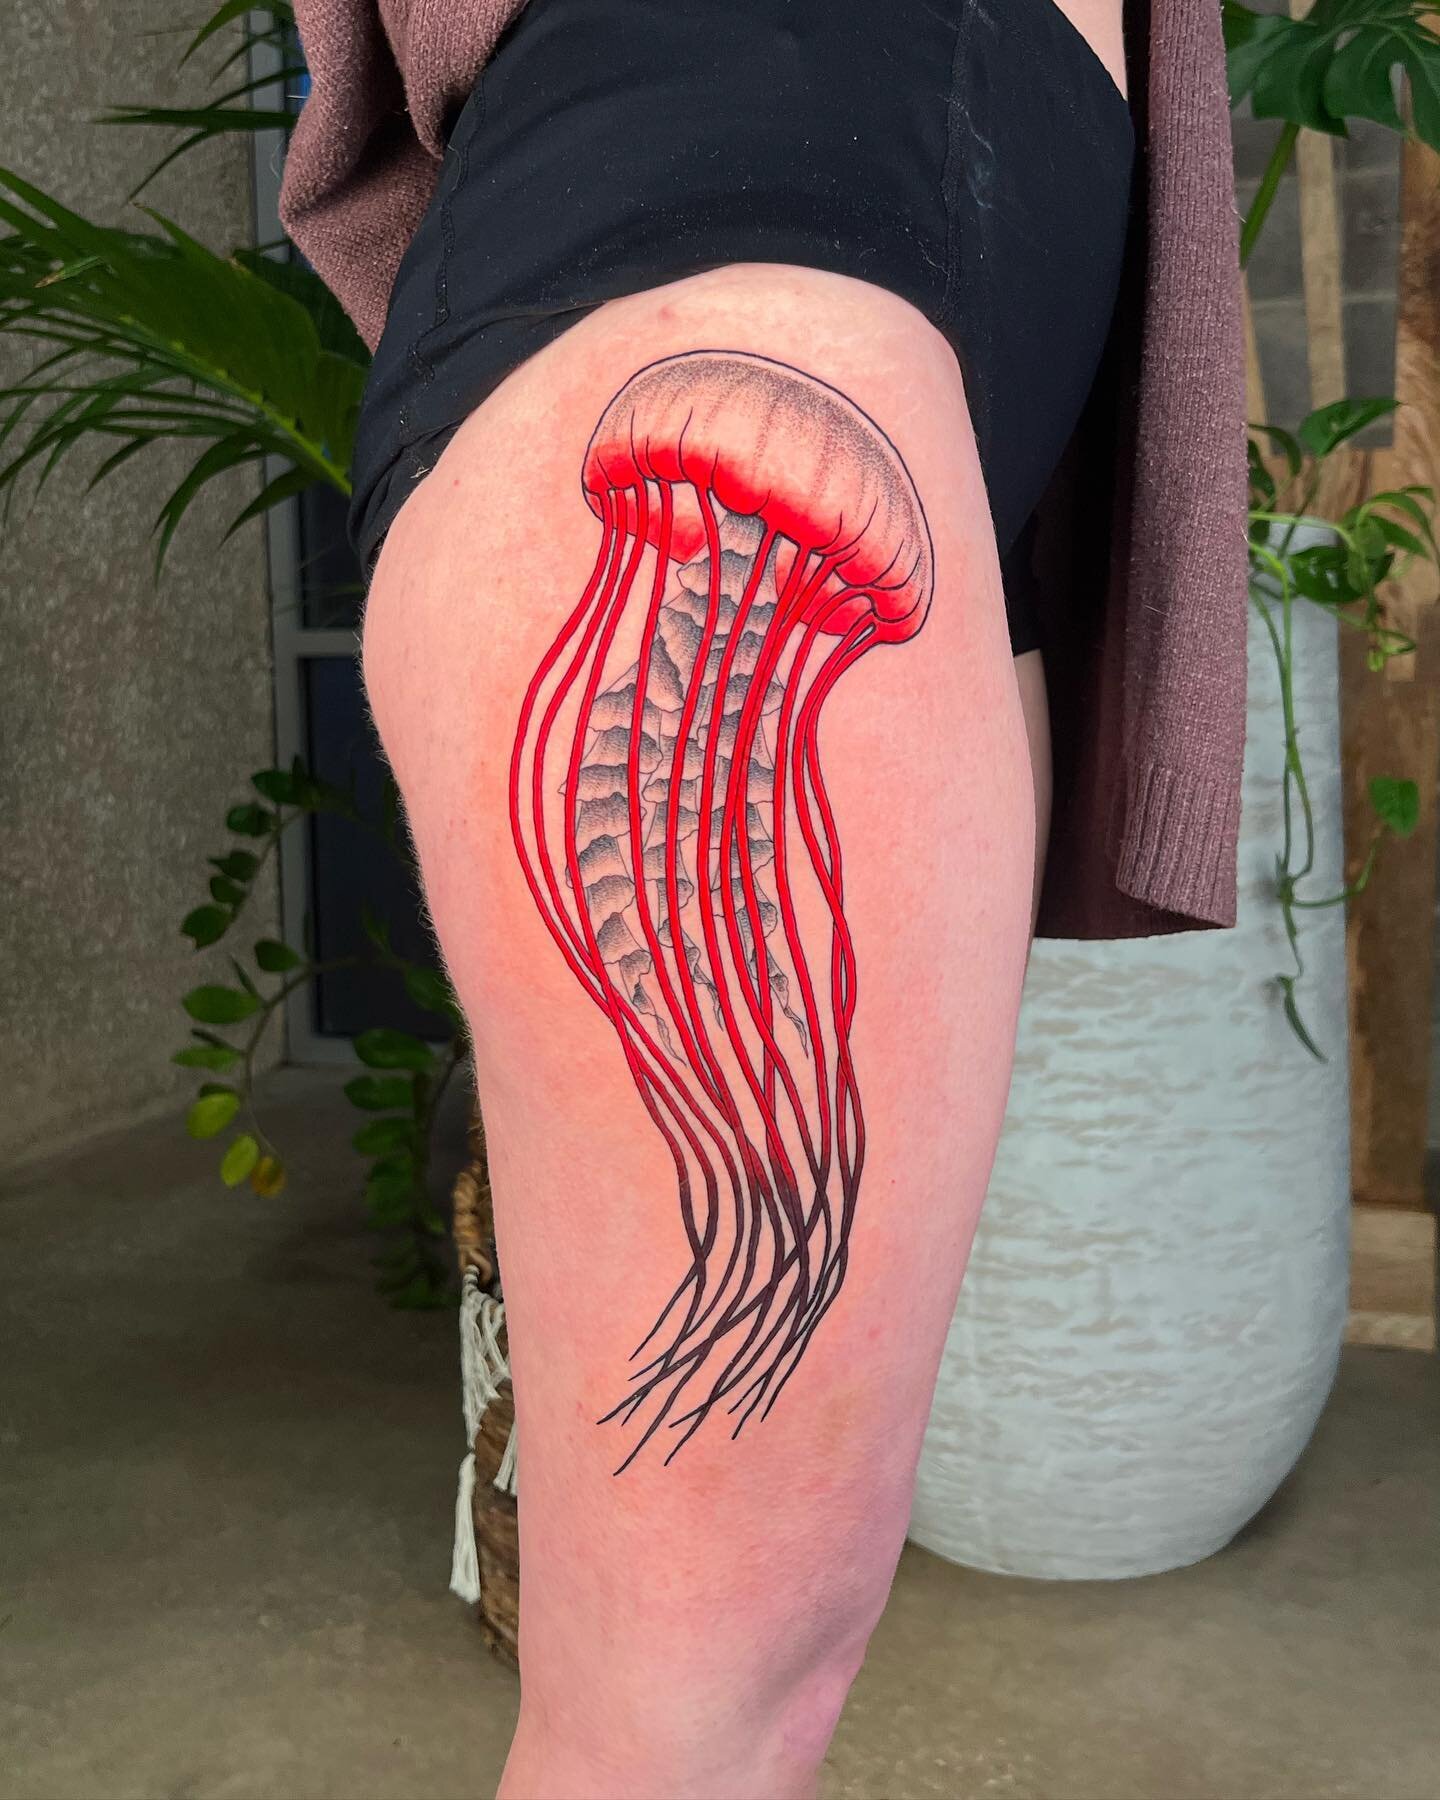 jellyfish
loved making this sea nettle jellyfish for athena. swipe to see it healed!
&bull;
#RayCorsonTattoo 
#DallasTattooArtist 
#TexasTattoos
#FemaleTattooer 
#Jellyfish 
#JellyfishTattoo